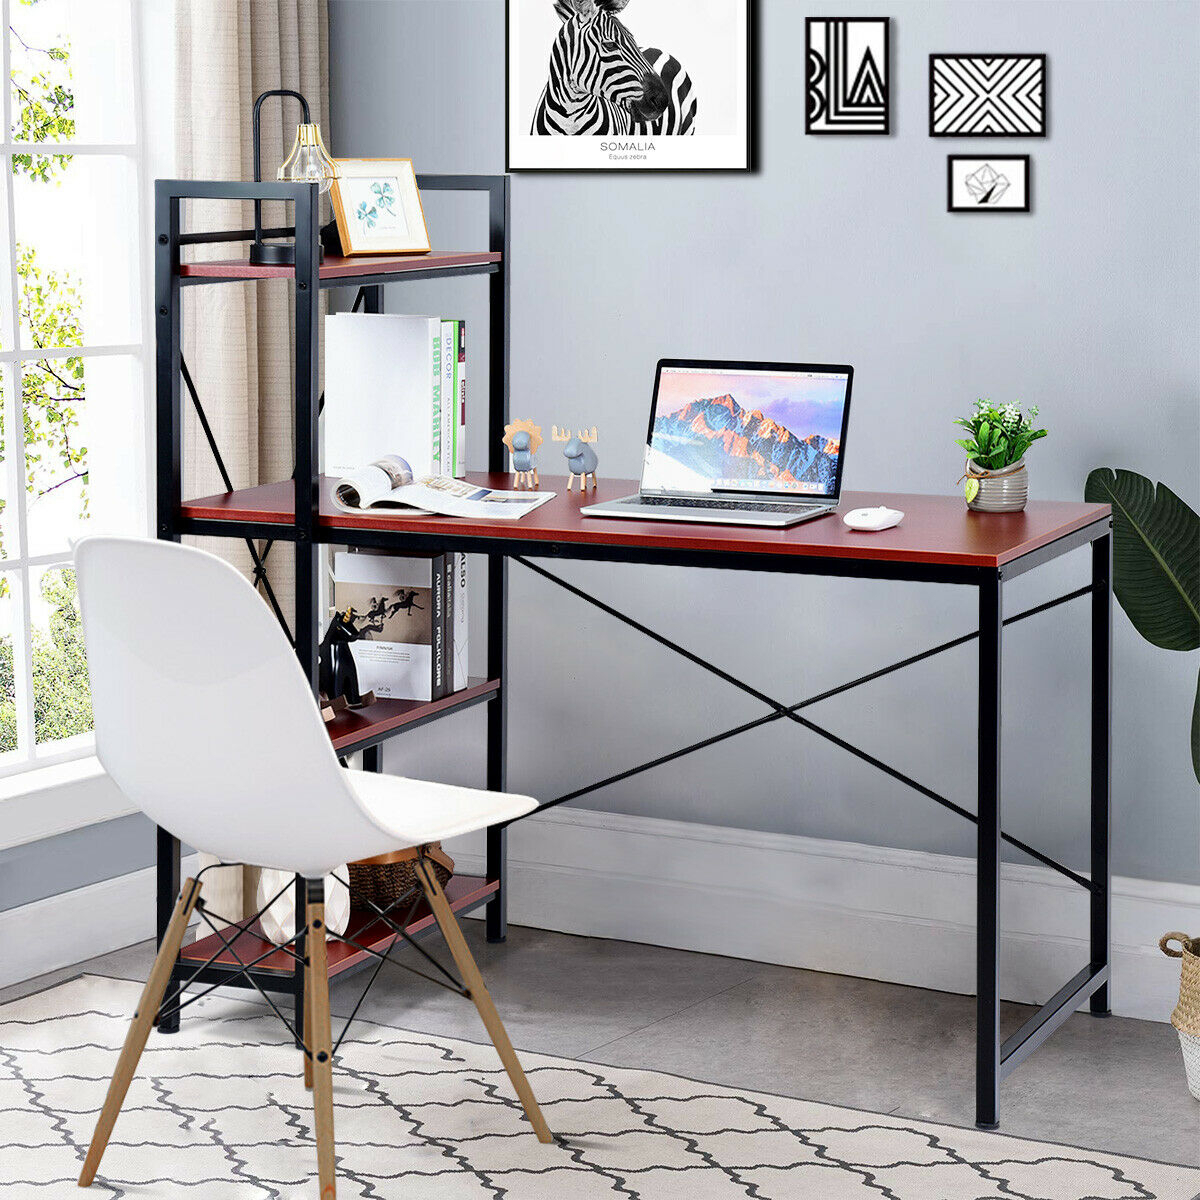 47.5'' Computer Desk Writing Desk Study Table Workstation With 4-Tier Shelves